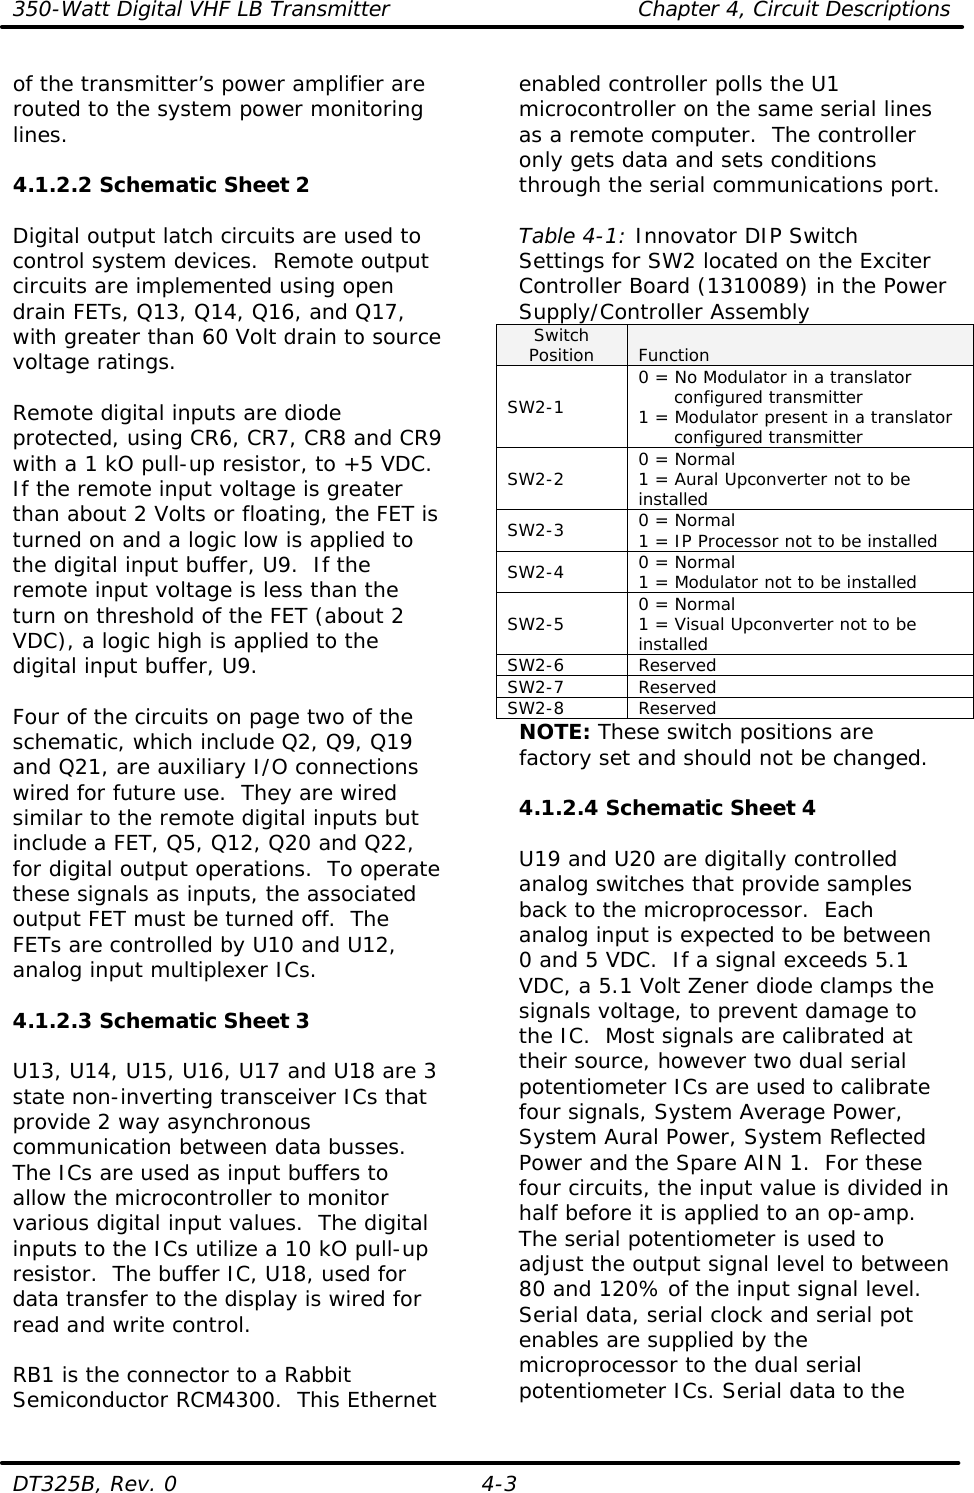 350-Watt Digital VHF LB Transmitter Chapter 4, Circuit Descriptions  DT325B, Rev. 0 4-3 of the transmitter’s power amplifier are routed to the system power monitoring lines.  4.1.2.2 Schematic Sheet 2  Digital output latch circuits are used to control system devices.  Remote output circuits are implemented using open drain FETs, Q13, Q14, Q16, and Q17, with greater than 60 Volt drain to source voltage ratings.  Remote digital inputs are diode protected, using CR6, CR7, CR8 and CR9 with a 1 kO pull-up resistor, to +5 VDC.  If the remote input voltage is greater than about 2 Volts or floating, the FET is turned on and a logic low is applied to the digital input buffer, U9.  If the remote input voltage is less than the turn on threshold of the FET (about 2 VDC), a logic high is applied to the digital input buffer, U9.  Four of the circuits on page two of the schematic, which include Q2, Q9, Q19 and Q21, are auxiliary I/O connections wired for future use.  They are wired similar to the remote digital inputs but include a FET, Q5, Q12, Q20 and Q22, for digital output operations.  To operate these signals as inputs, the associated output FET must be turned off.  The FETs are controlled by U10 and U12, analog input multiplexer ICs.  4.1.2.3 Schematic Sheet 3  U13, U14, U15, U16, U17 and U18 are 3 state non-inverting transceiver ICs that provide 2 way asynchronous communication between data busses.  The ICs are used as input buffers to allow the microcontroller to monitor various digital input values.  The digital inputs to the ICs utilize a 10 kO pull-up resistor.  The buffer IC, U18, used for data transfer to the display is wired for read and write control.  RB1 is the connector to a Rabbit Semiconductor RCM4300.  This Ethernet enabled controller polls the U1 microcontroller on the same serial lines as a remote computer.  The controller only gets data and sets conditions through the serial communications port.  Table 4-1: Innovator DIP Switch Settings for SW2 located on the Exciter Controller Board (1310089) in the Power Supply/Controller Assembly Switch Position Function SW2-1 0 = No Modulator in a translator       configured transmitter 1 = Modulator present in a translator       configured transmitter SW2-2 0 = Normal 1 = Aural Upconverter not to be installed SW2-3 0 = Normal 1 = IP Processor not to be installed SW2-4 0 = Normal 1 = Modulator not to be installed SW2-5 0 = Normal 1 = Visual Upconverter not to be installed SW2-6 Reserved SW2-7 Reserved SW2-8 Reserved NOTE: These switch positions are factory set and should not be changed.  4.1.2.4 Schematic Sheet 4  U19 and U20 are digitally controlled analog switches that provide samples back to the microprocessor.  Each analog input is expected to be between 0 and 5 VDC.  If a signal exceeds 5.1 VDC, a 5.1 Volt Zener diode clamps the signals voltage, to prevent damage to the IC.  Most signals are calibrated at their source, however two dual serial potentiometer ICs are used to calibrate four signals, System Average Power, System Aural Power, System Reflected Power and the Spare AIN 1.  For these four circuits, the input value is divided in half before it is applied to an op-amp.  The serial potentiometer is used to adjust the output signal level to between 80 and 120% of the input signal level.  Serial data, serial clock and serial pot enables are supplied by the microprocessor to the dual serial potentiometer ICs. Serial data to the 